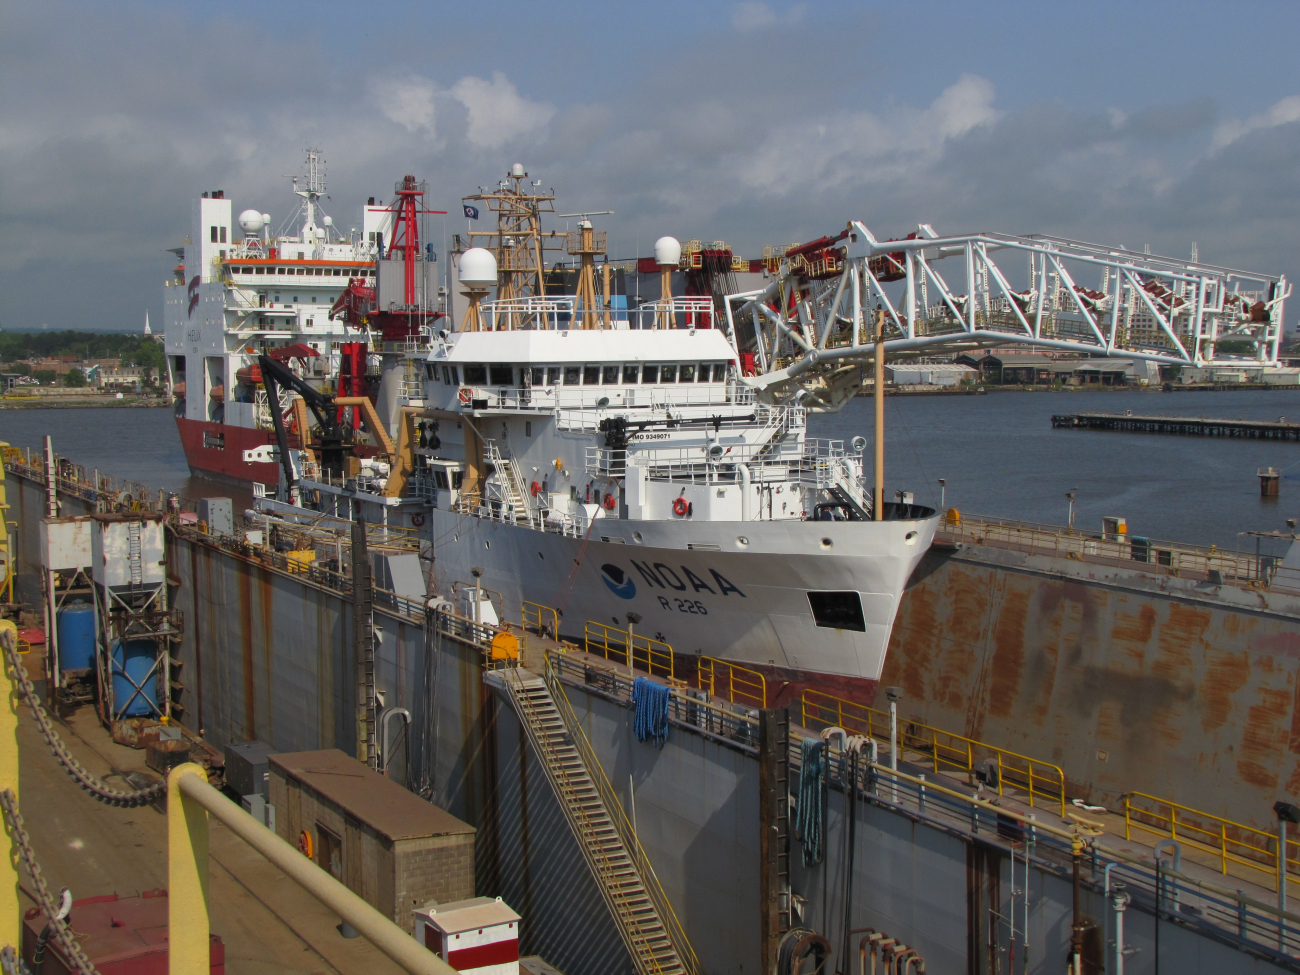 NOAA Ship PISCES in drydock with water pumped out